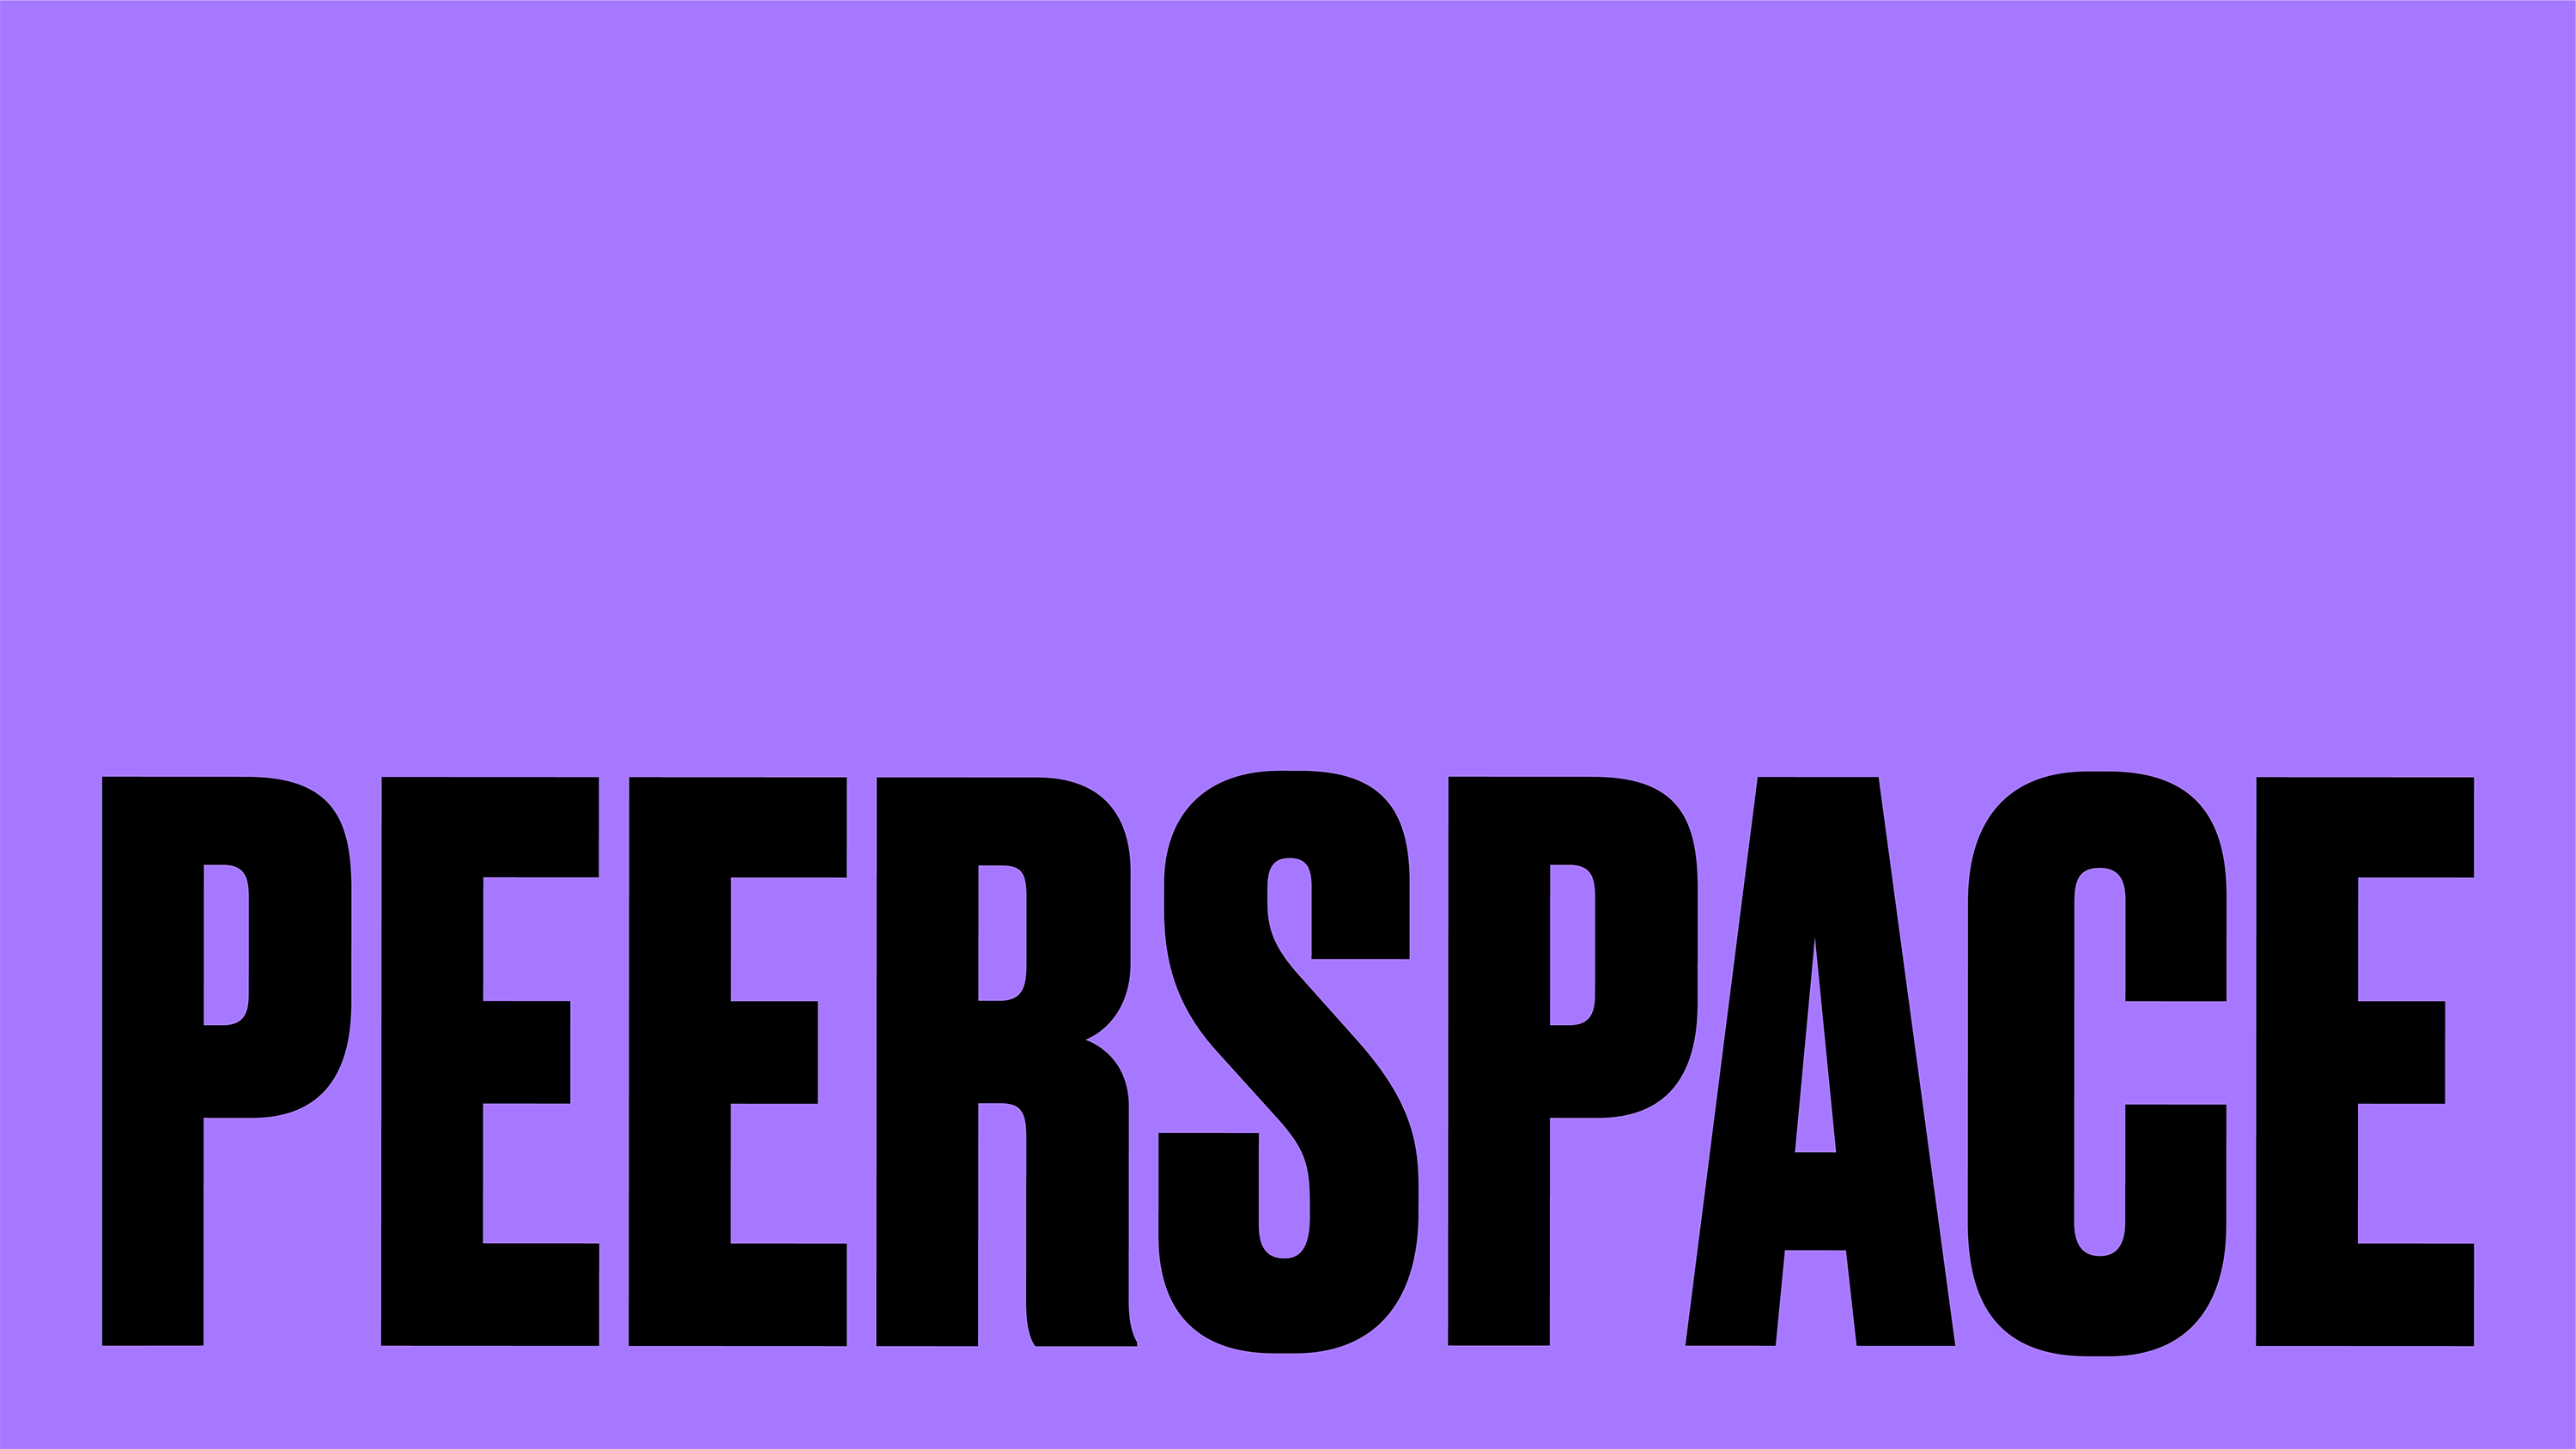 Logotype for peer-owned venue business Peerspace, designed by Mother Design. Reviewed by Eleanor Robertson for BP&O.